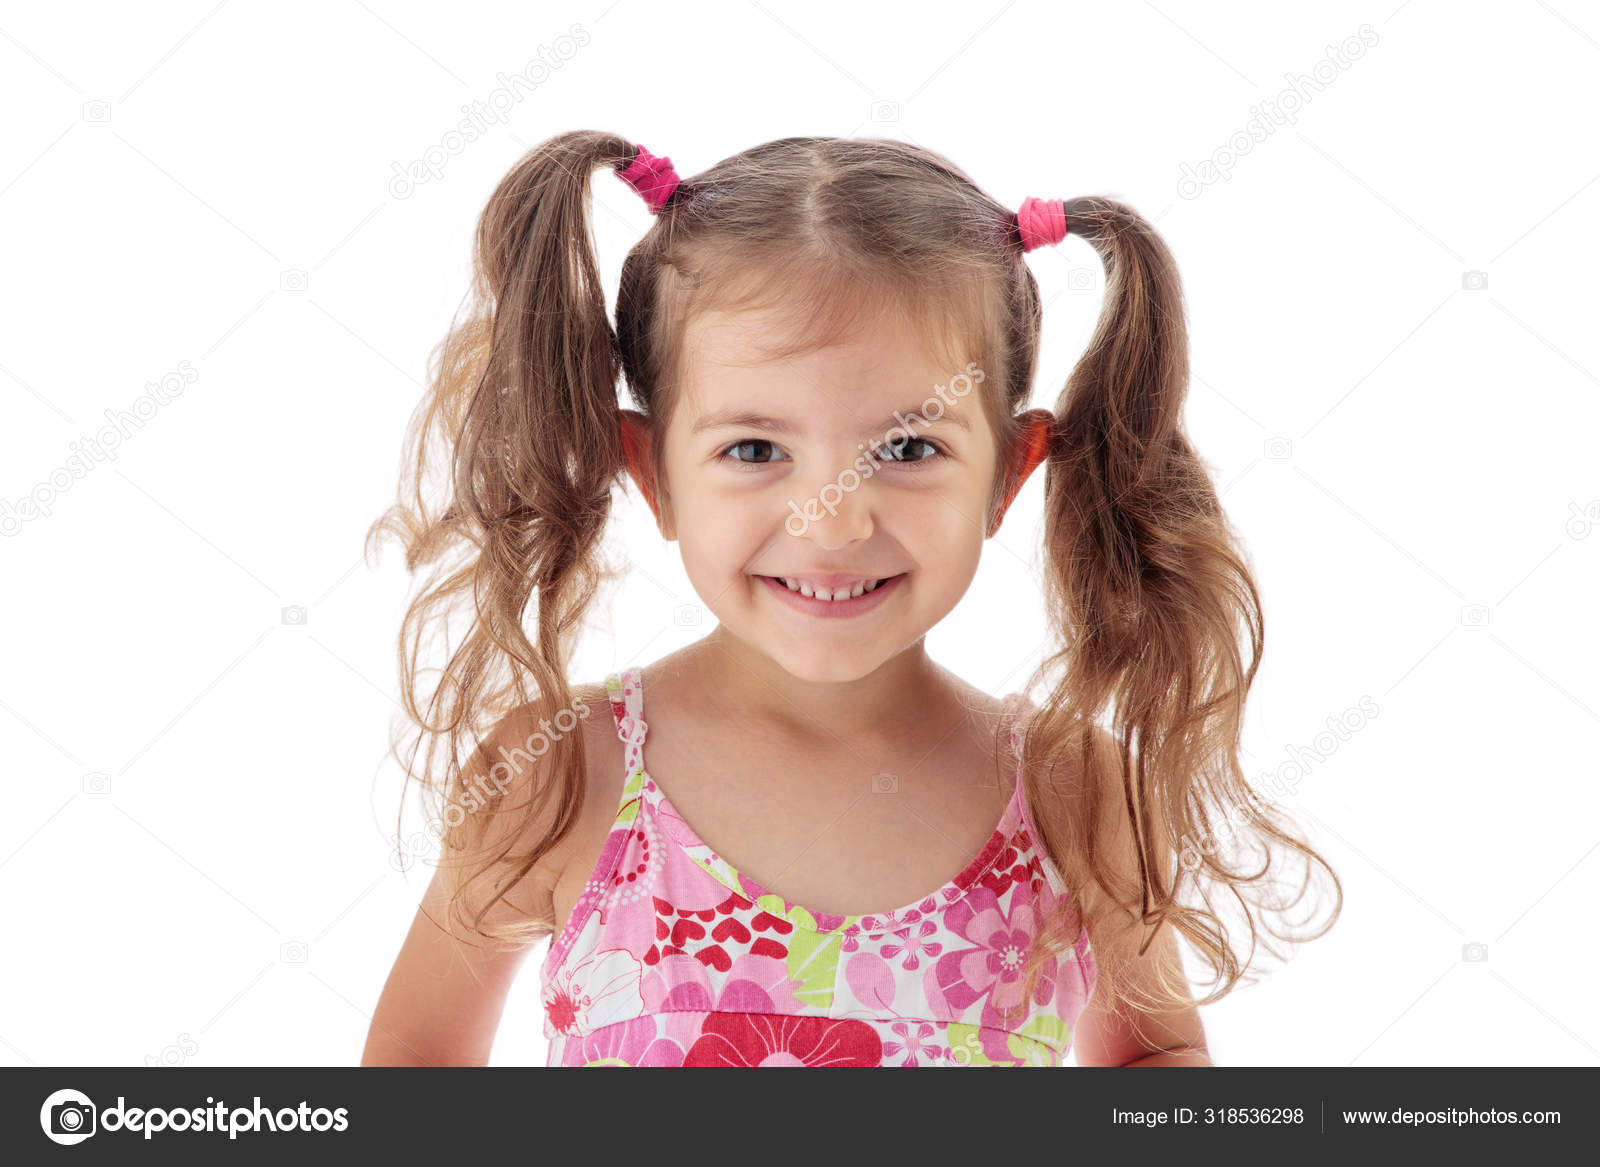 Kids and Sport. Side View of a Happy Little Girl Smiling at Camera